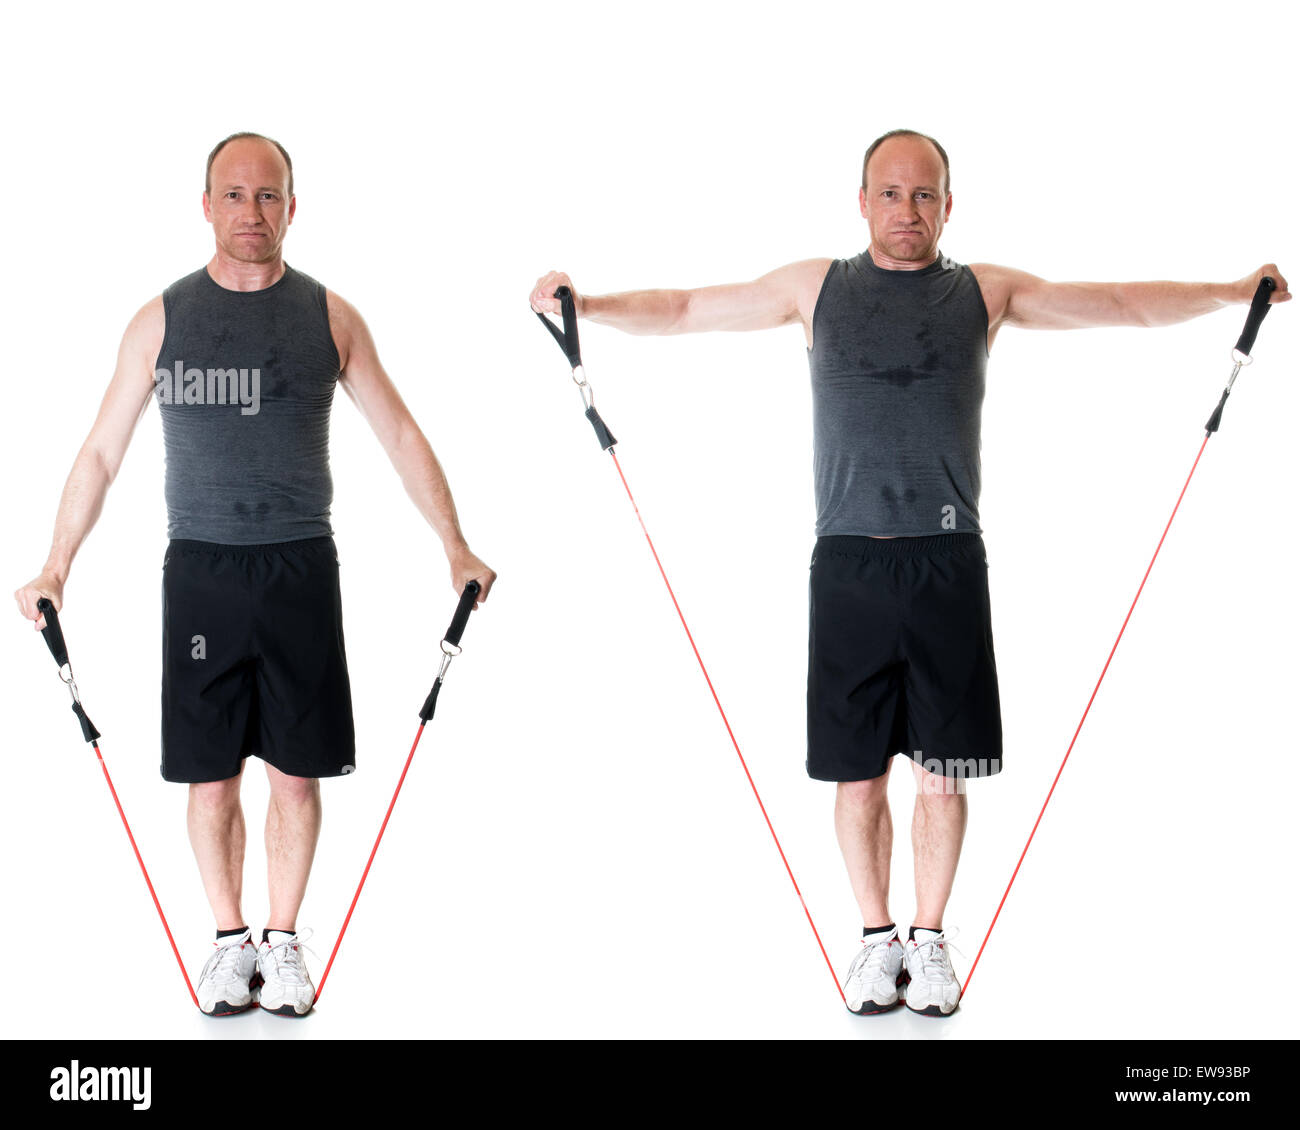 Lateral raise exercise with resistance band. Studio shot over white. Stock Photo